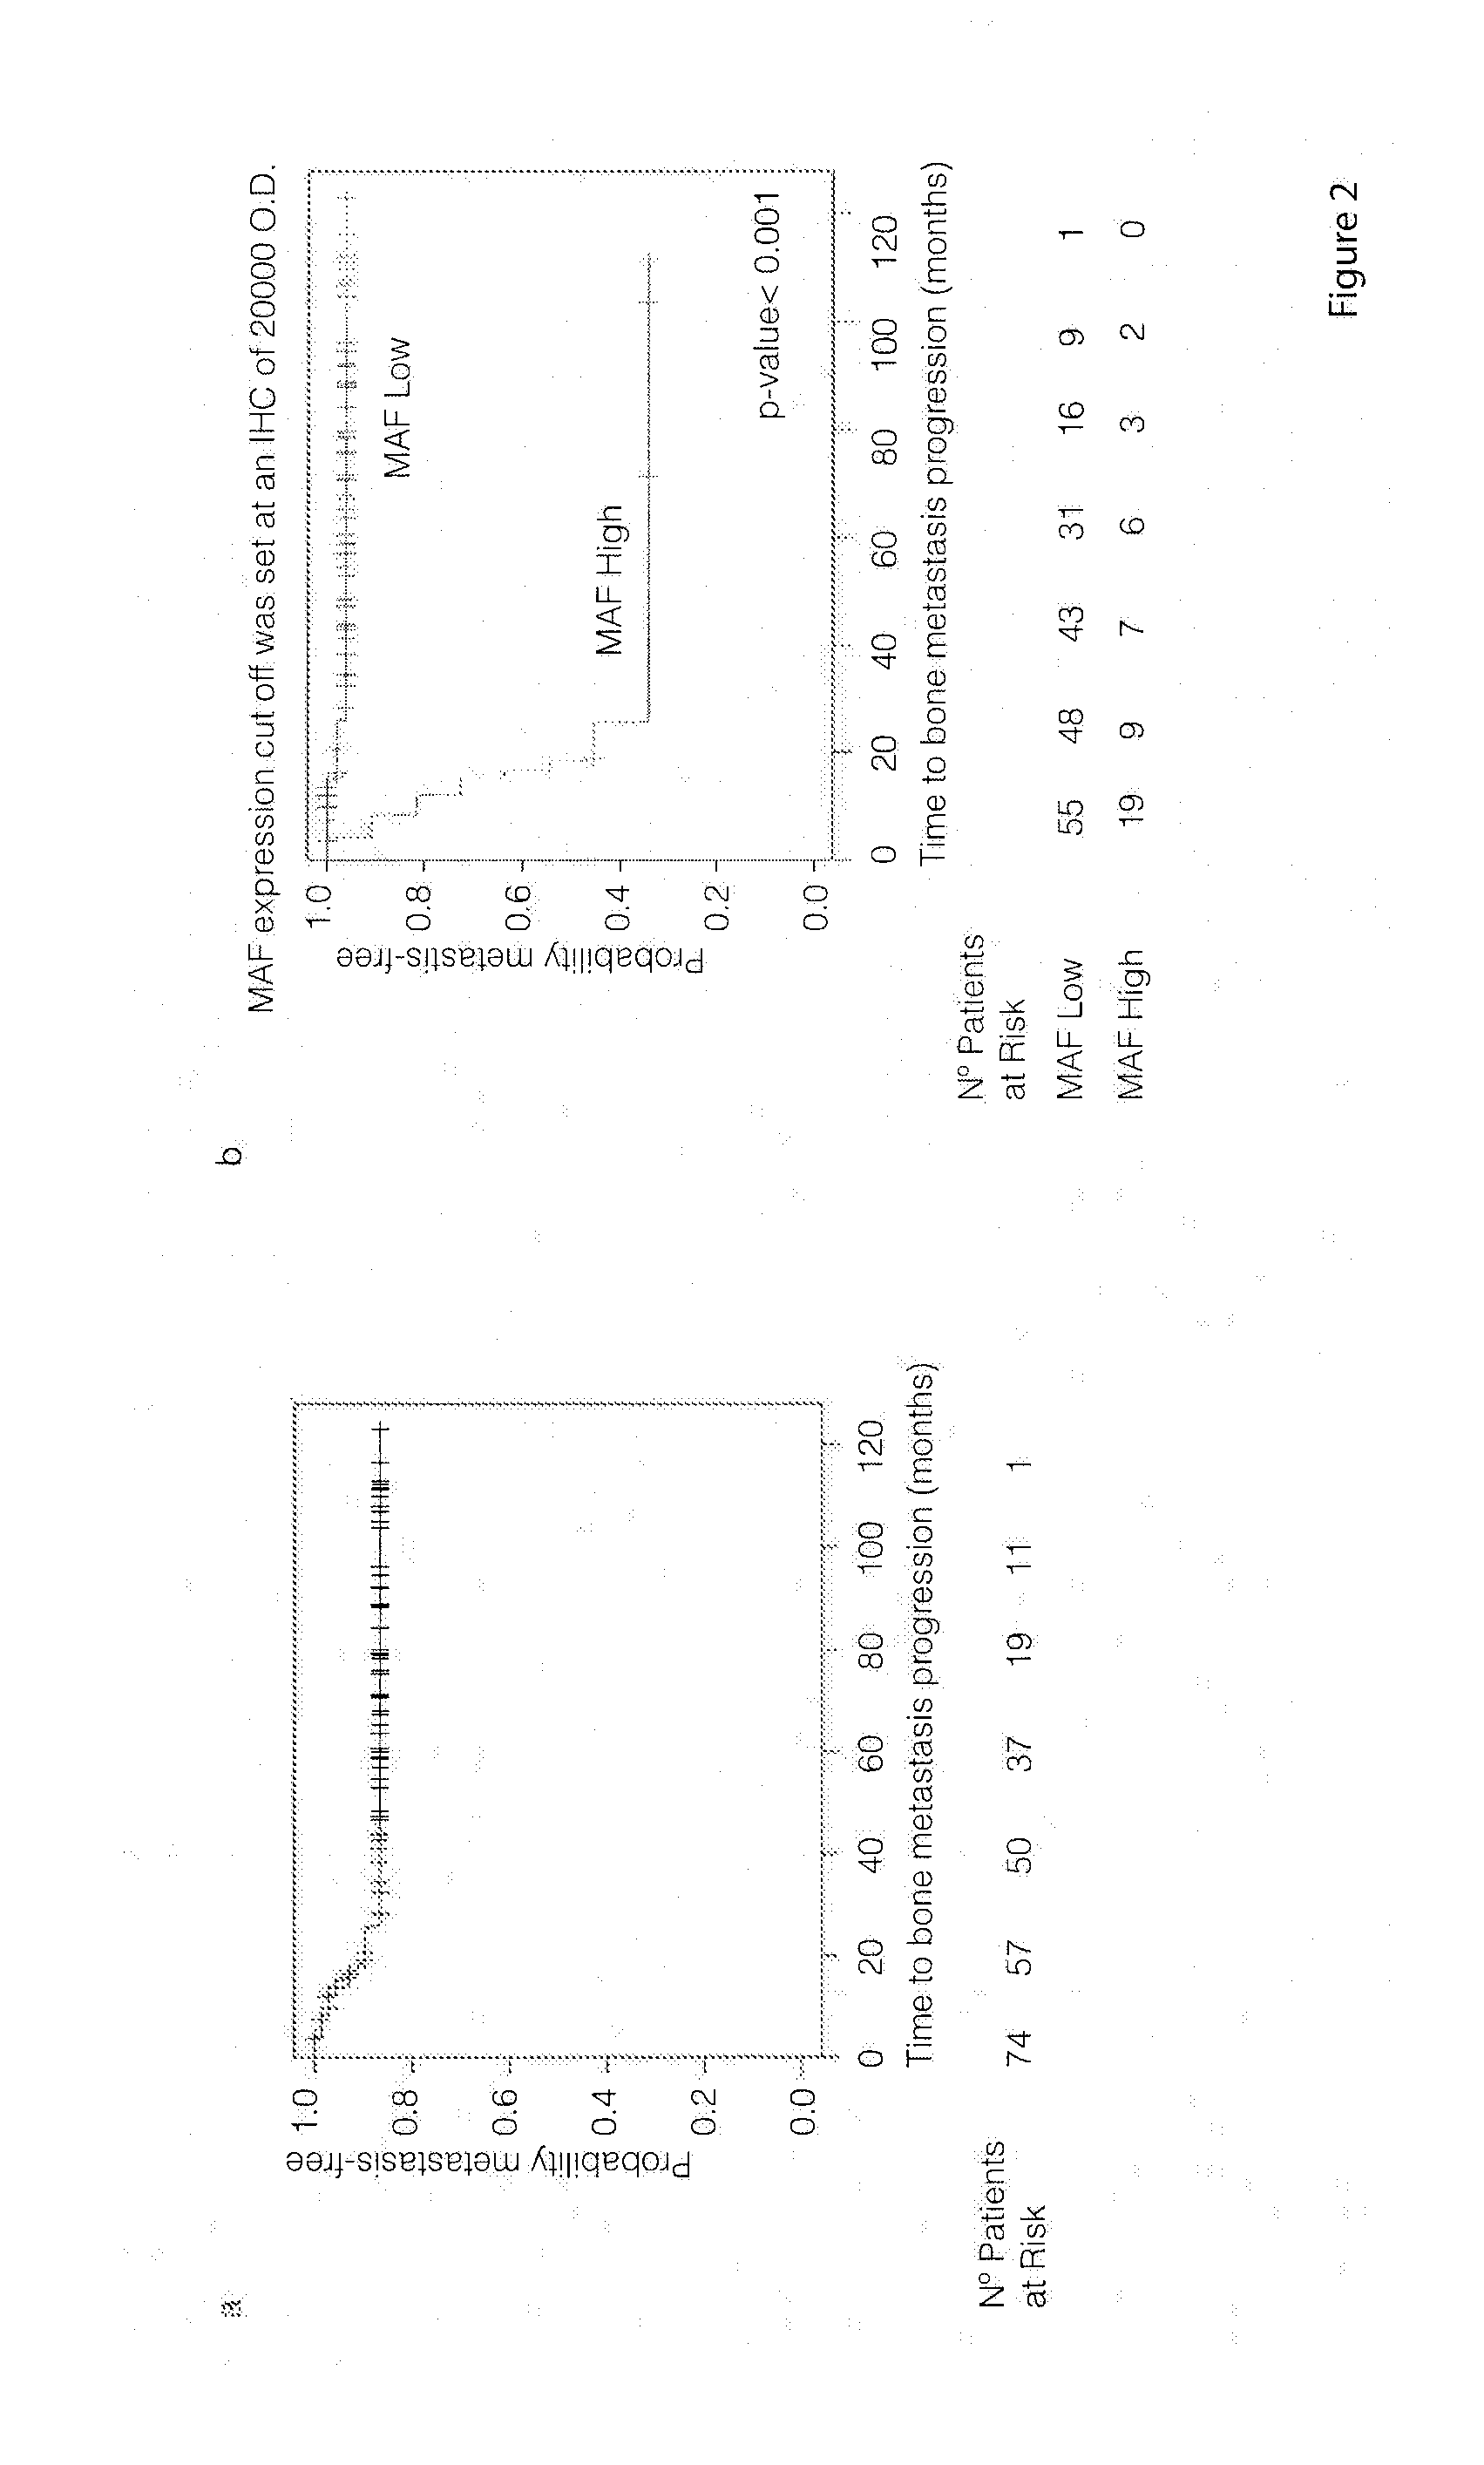 Method for the diagnosis, prognosis and treatment of lung cancer metastasis